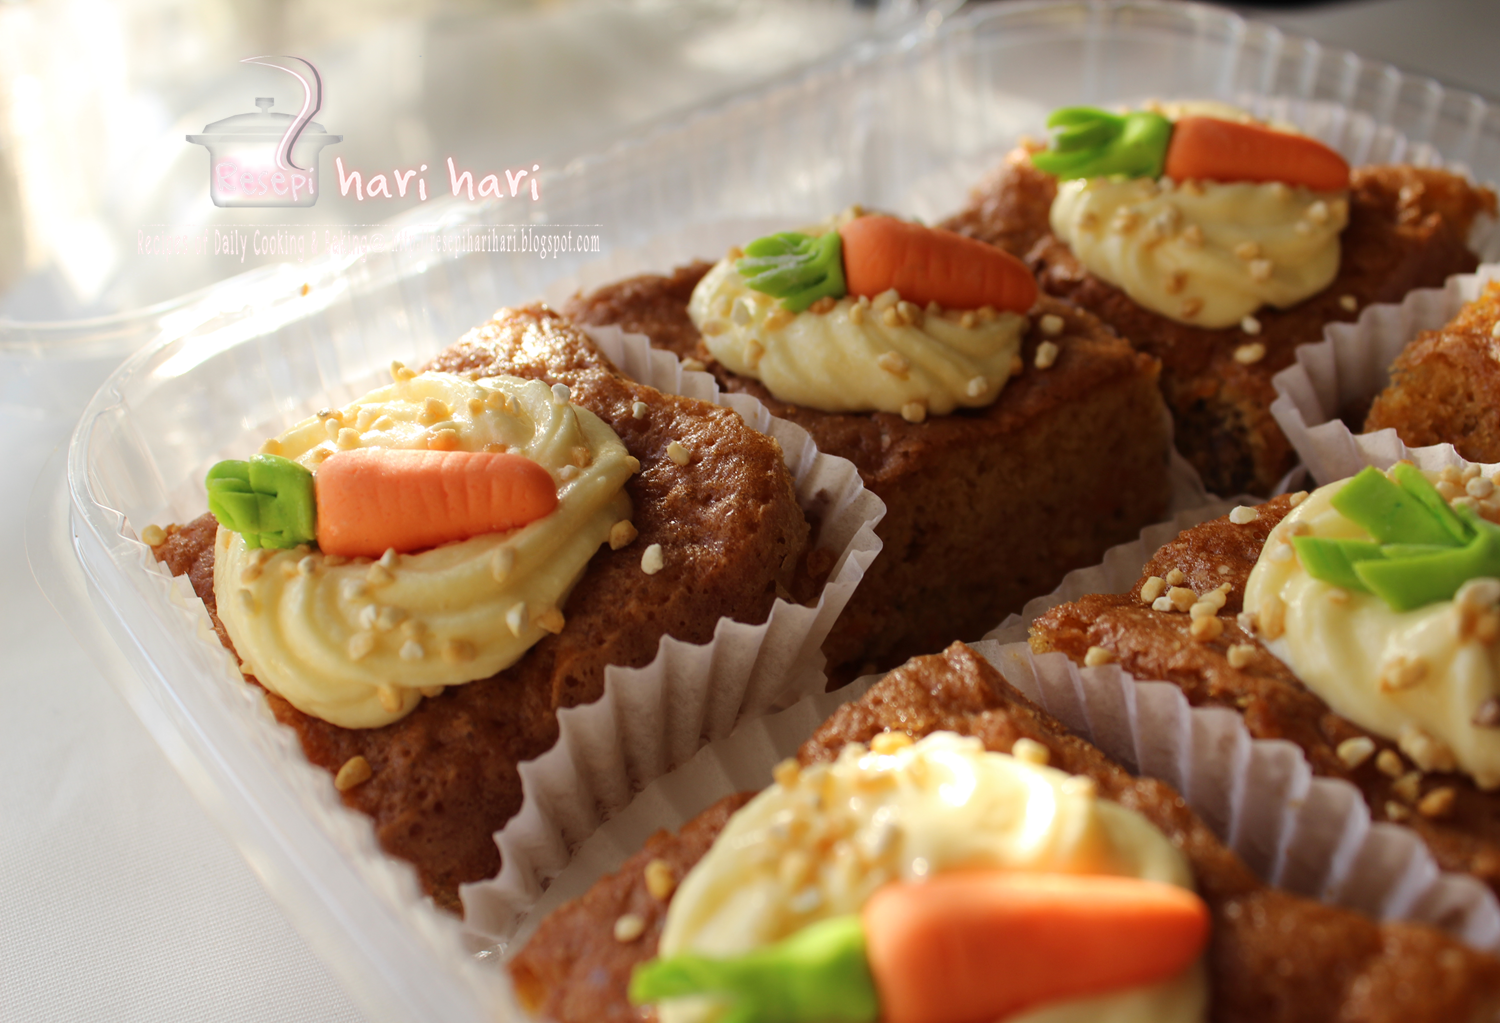 Recipes of Daily Cooking and Baking : Creamy Carrot Cake 